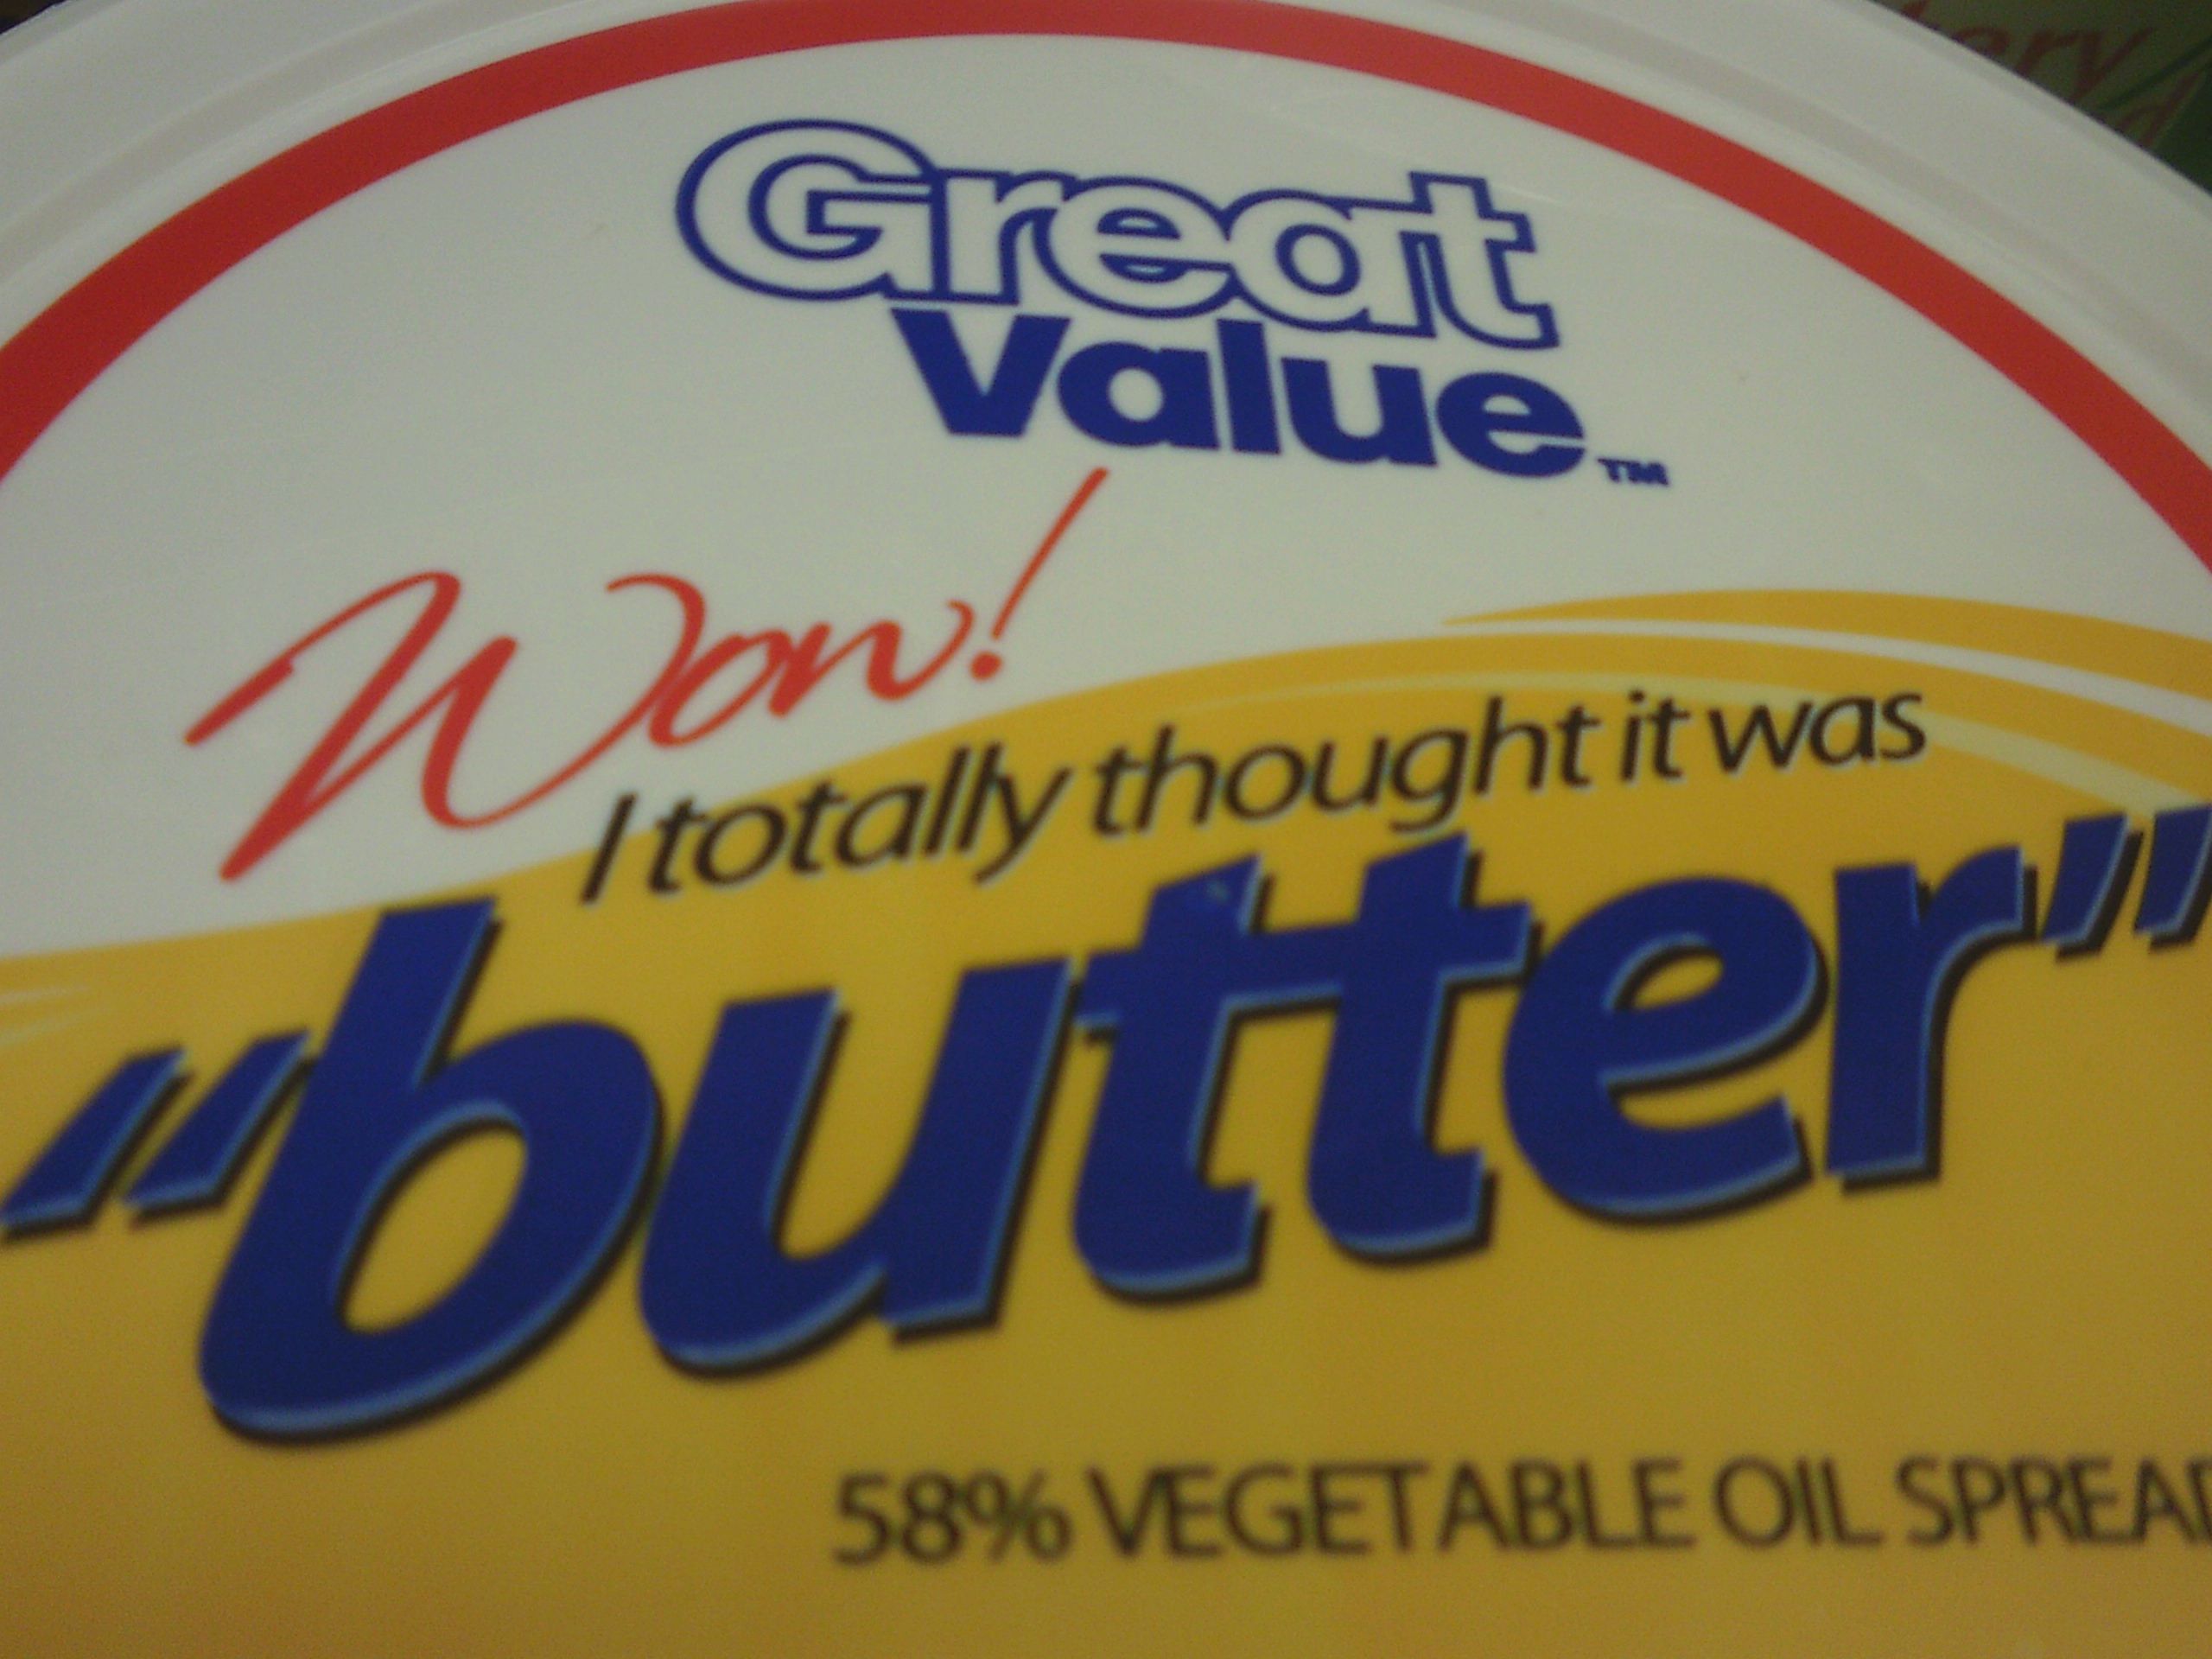 Wow! I Totally Thought It Was ‘Butter’!